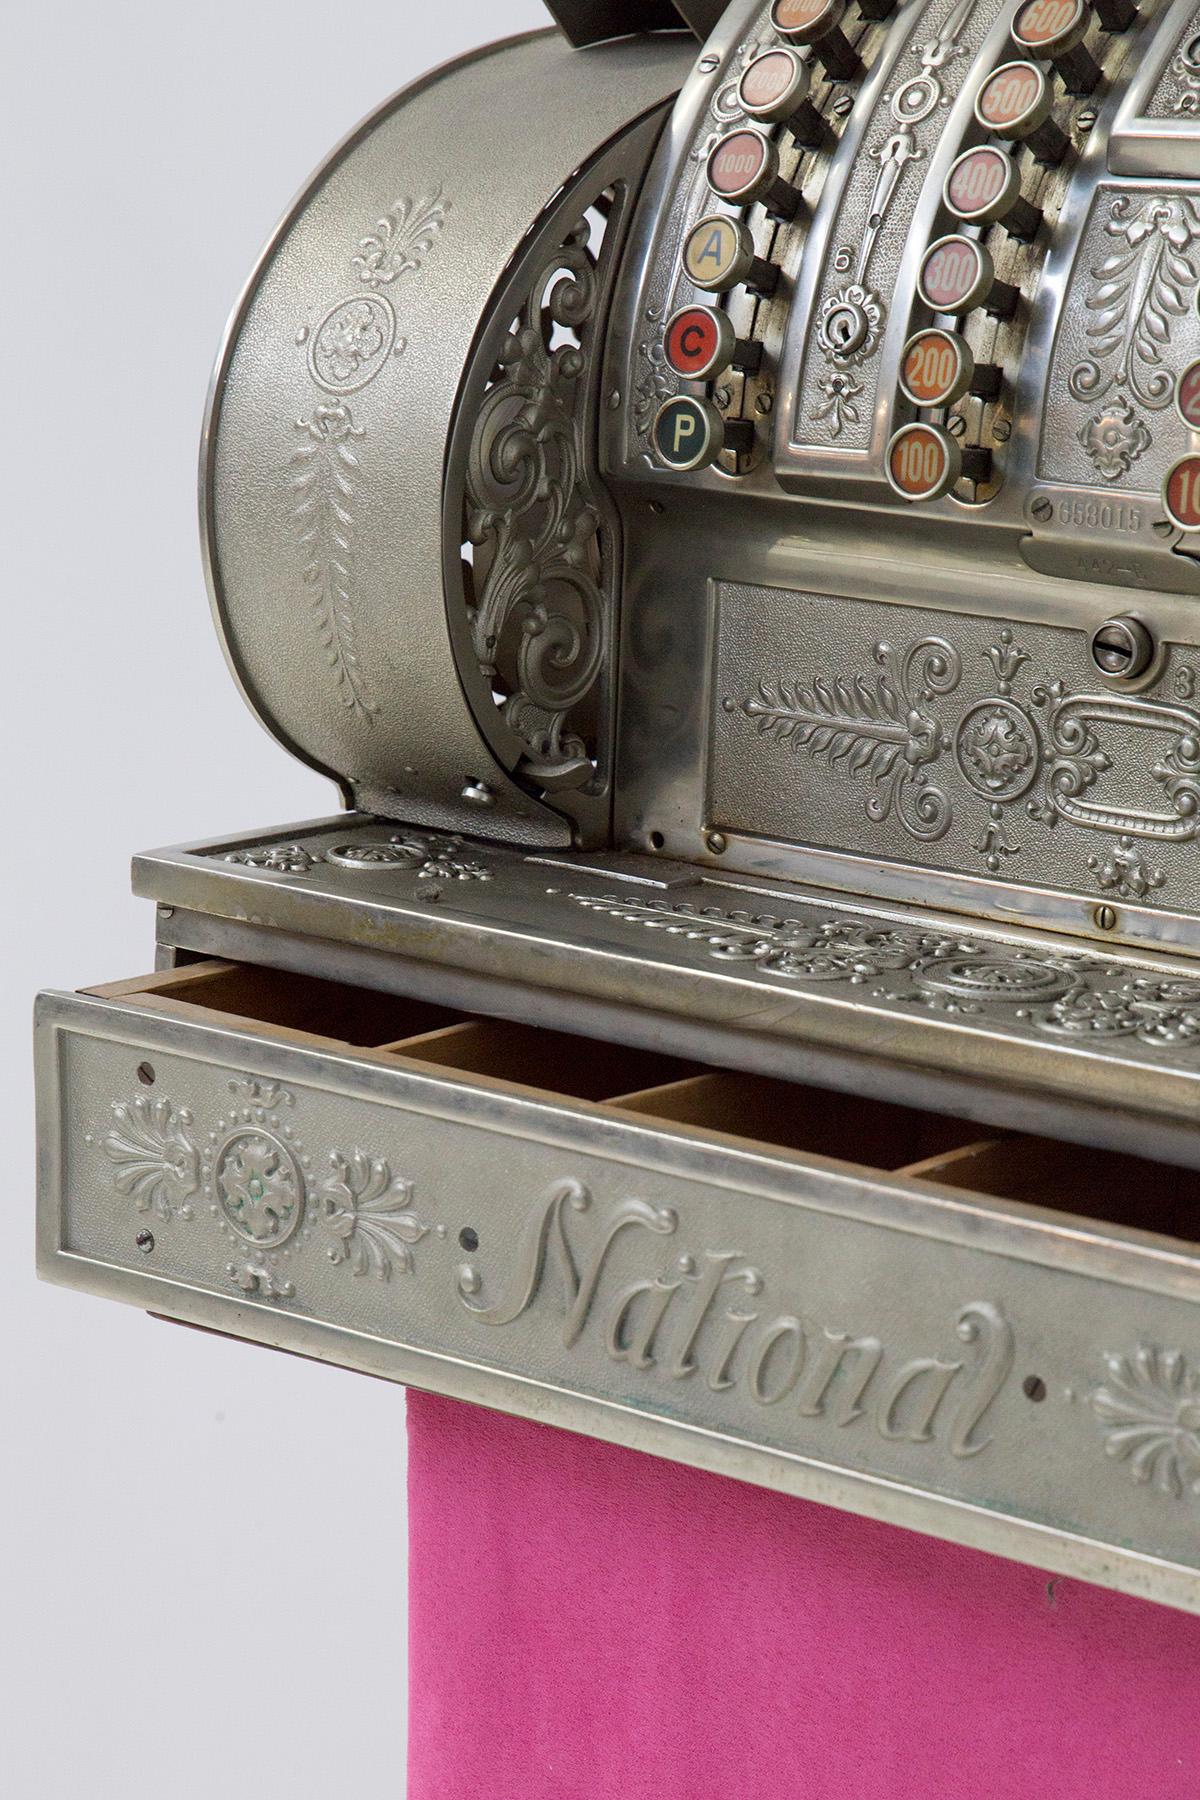 Early 20th Century American vintage cash register from NATIONAL, made of metal For Sale